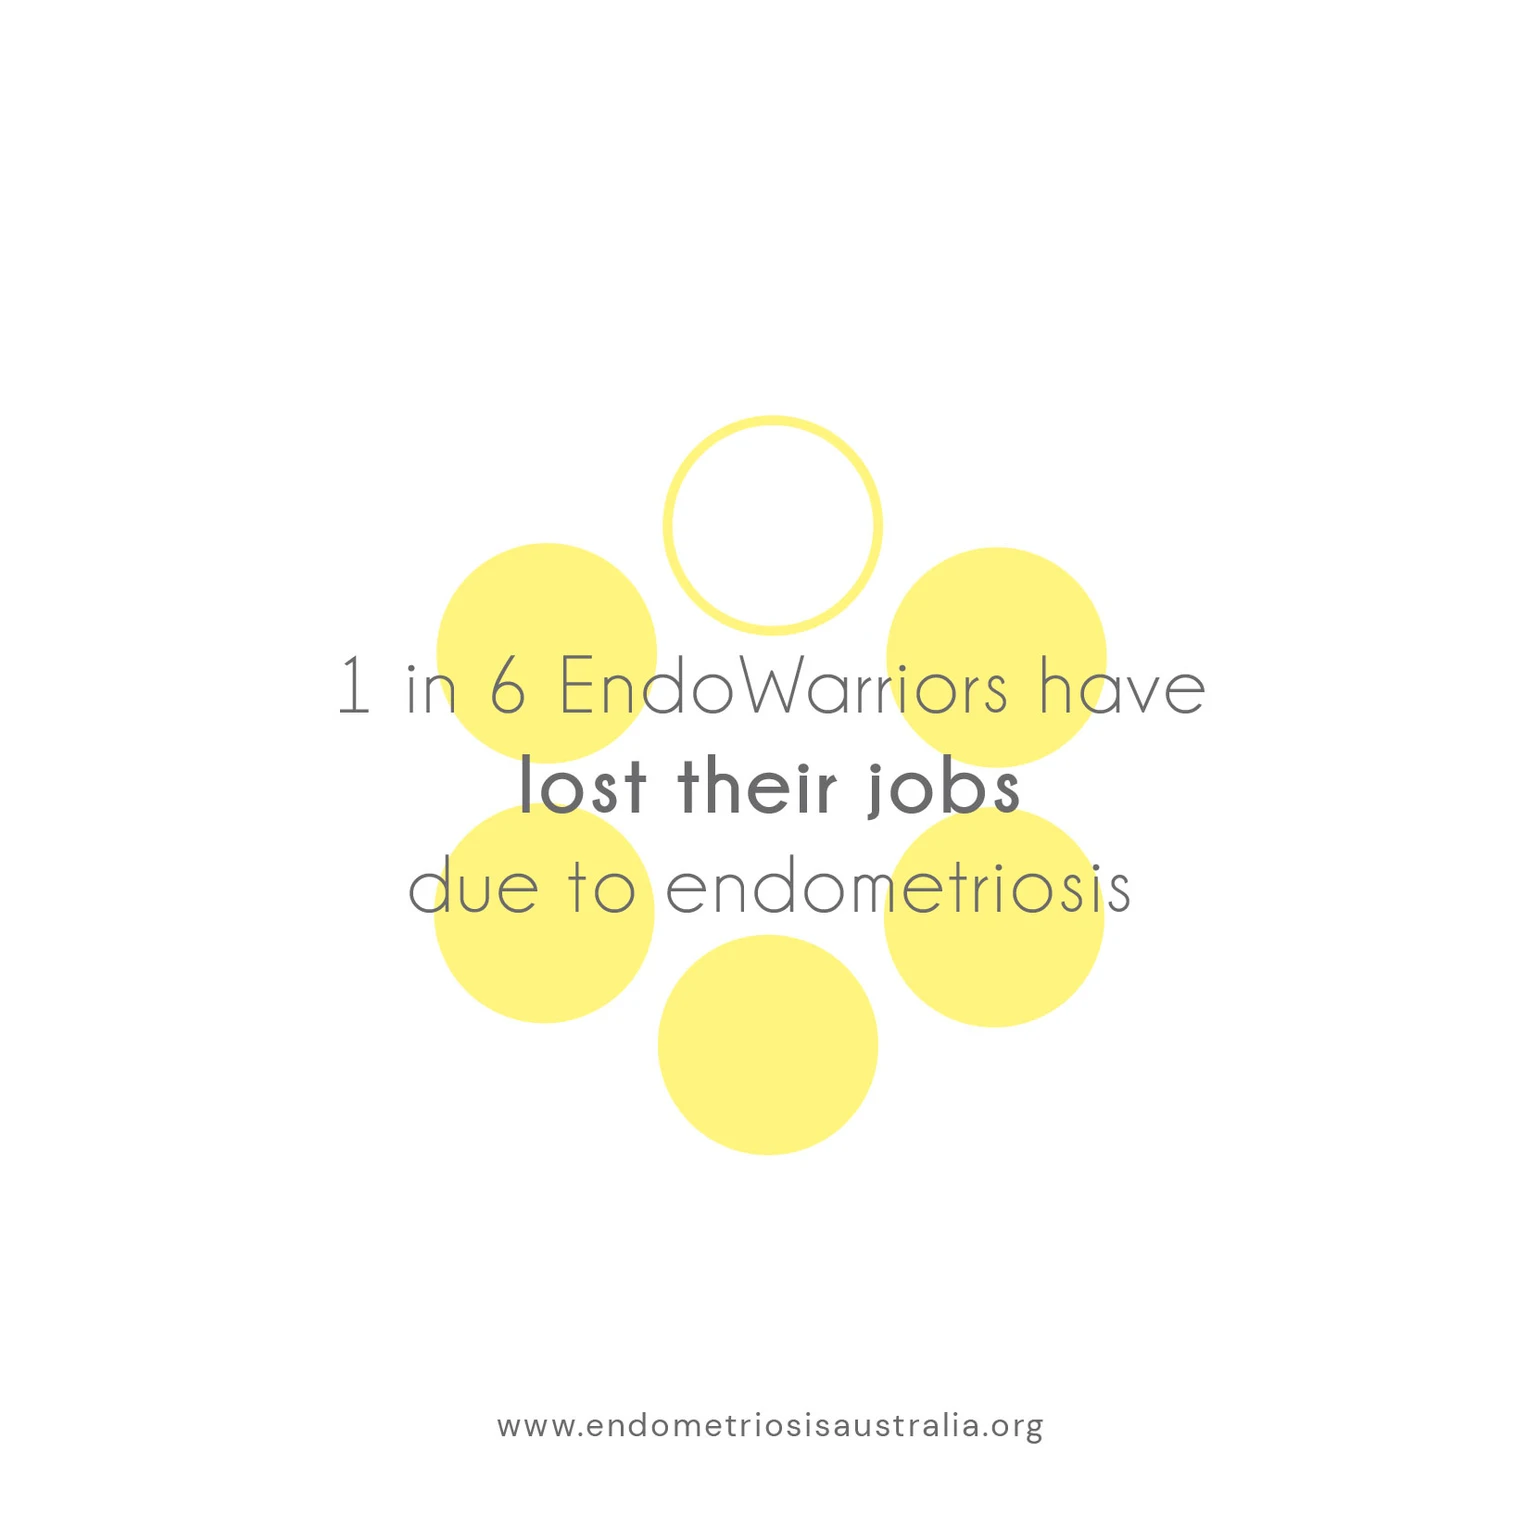 1 in 6 Endo Warriors have lost their jobs due to endometriosis